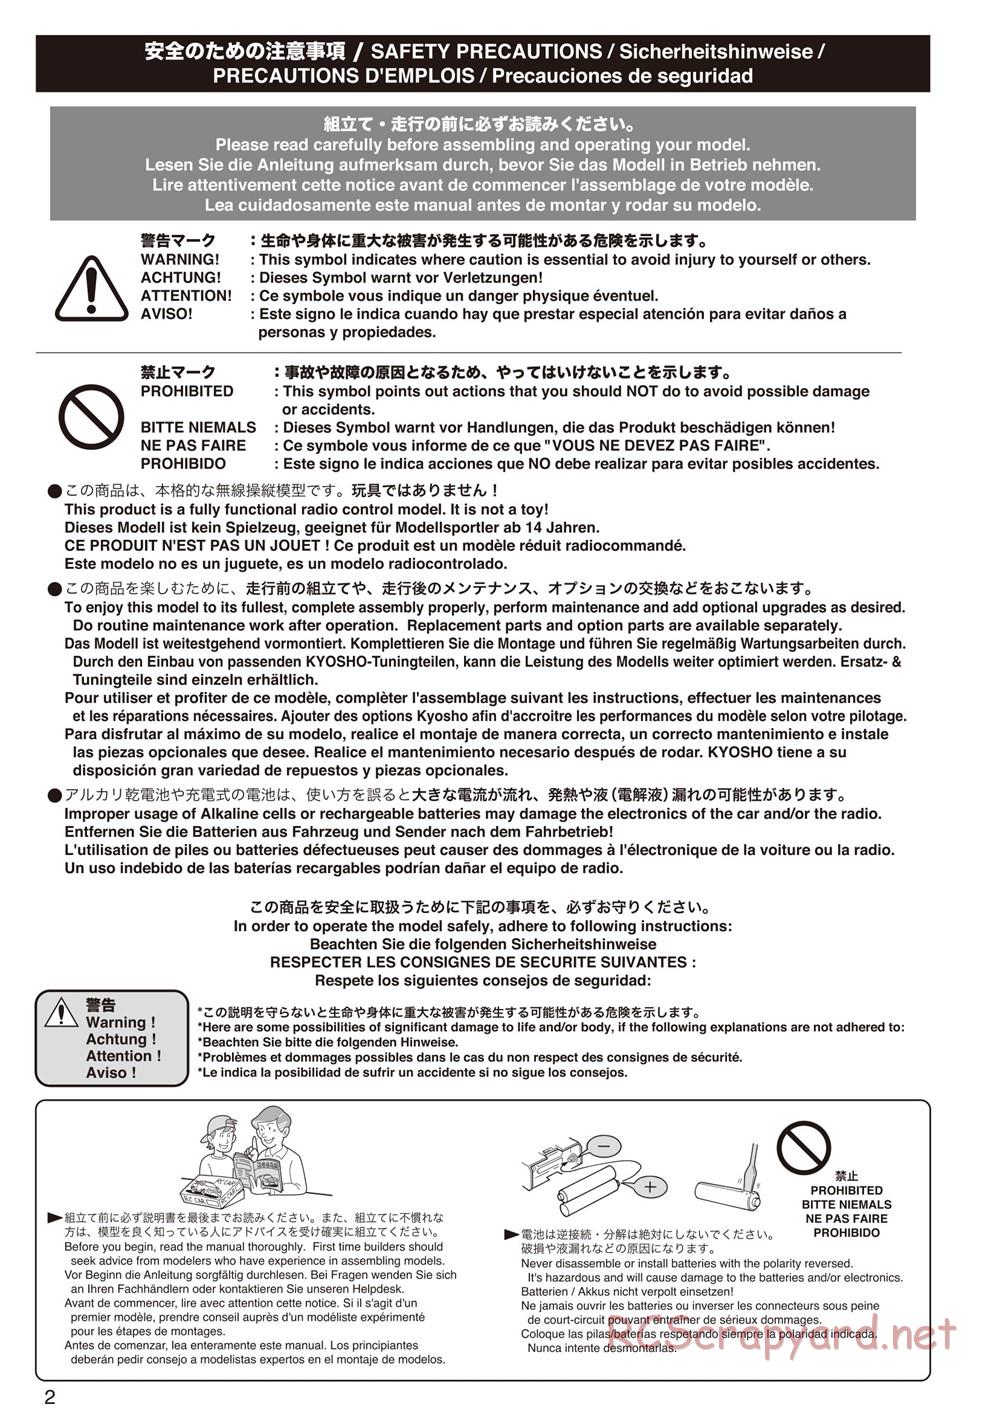 Kyosho - DRX - Manual - Page 2